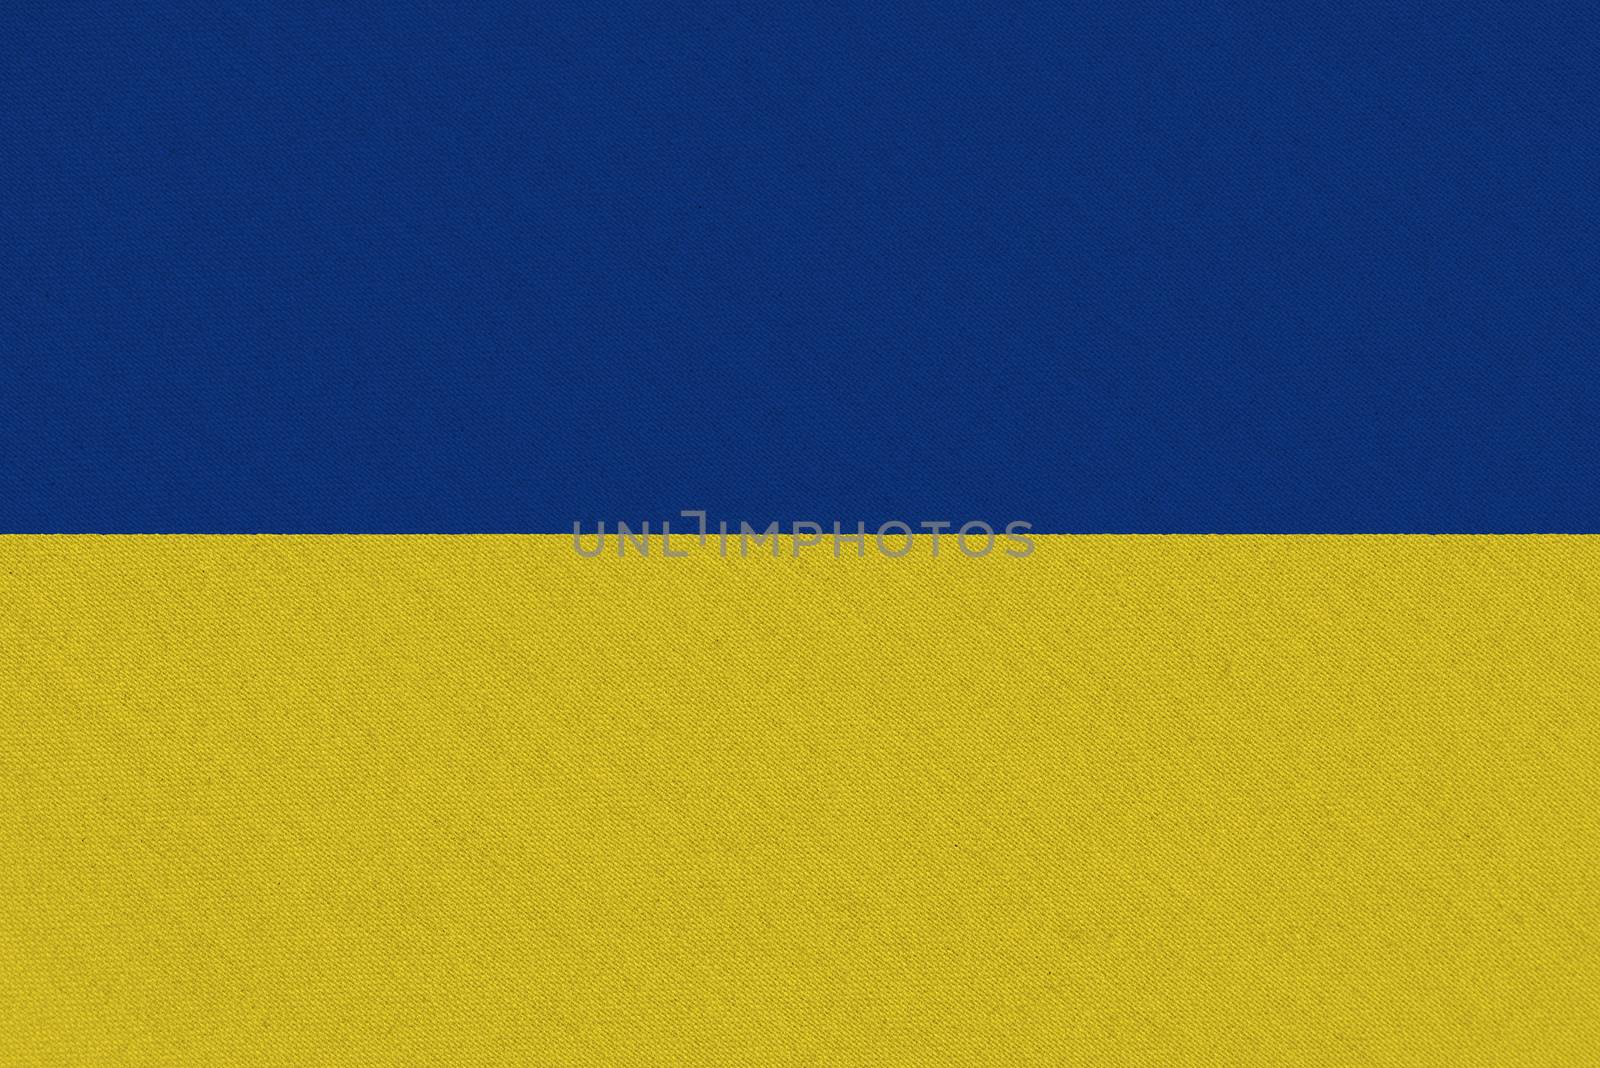 Ukraine fabric flag by Visual-Content